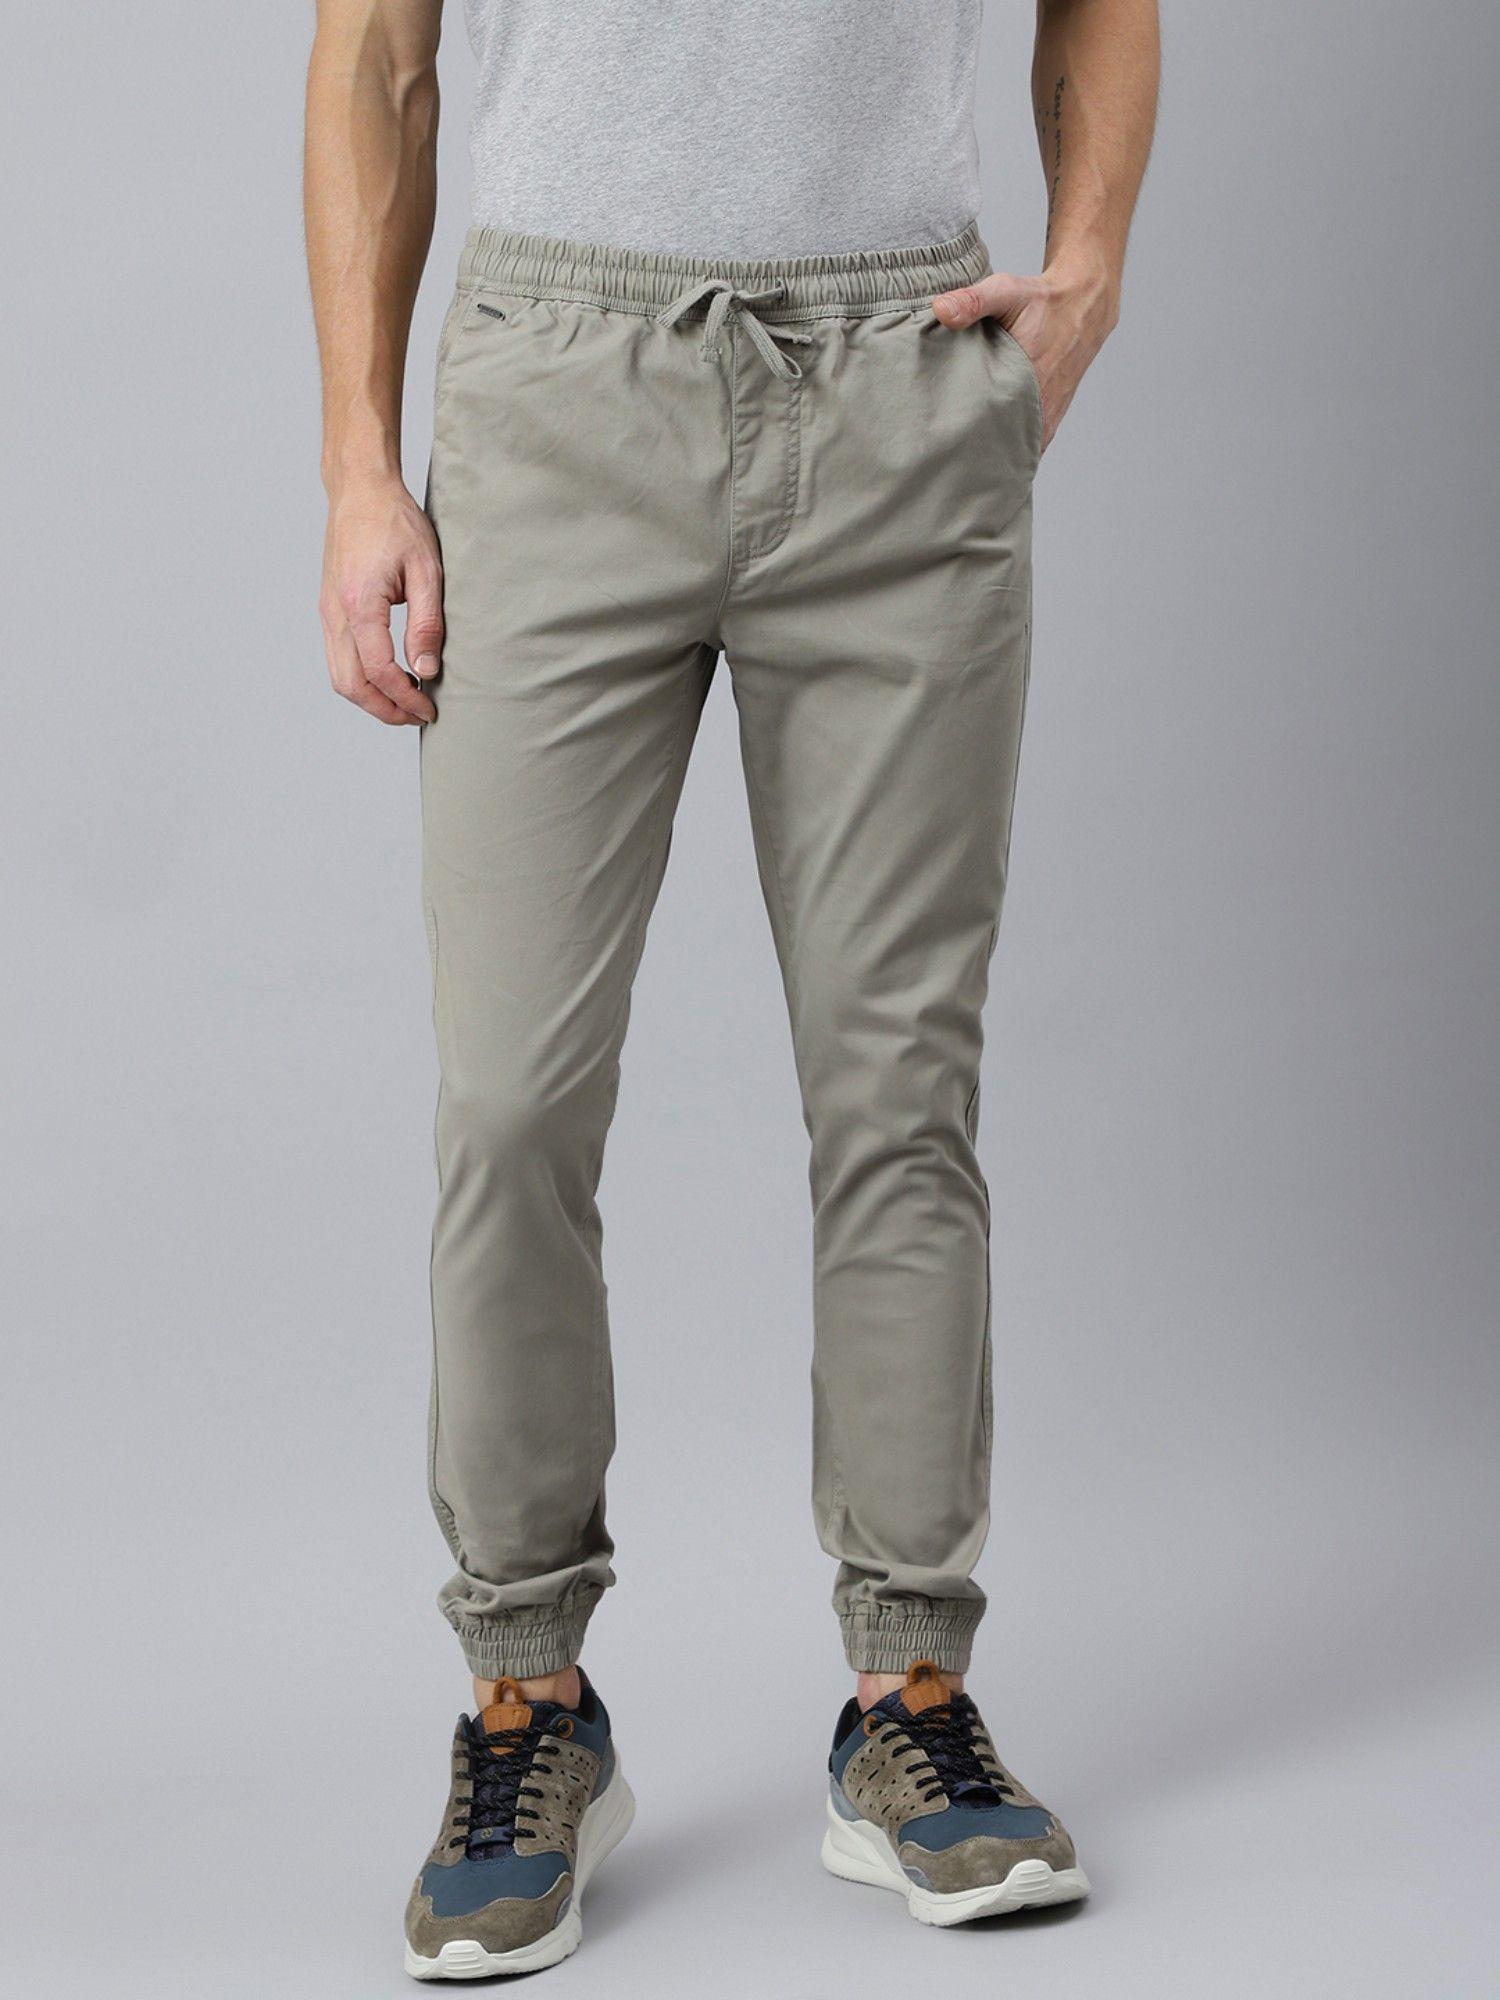 solid olive joggers